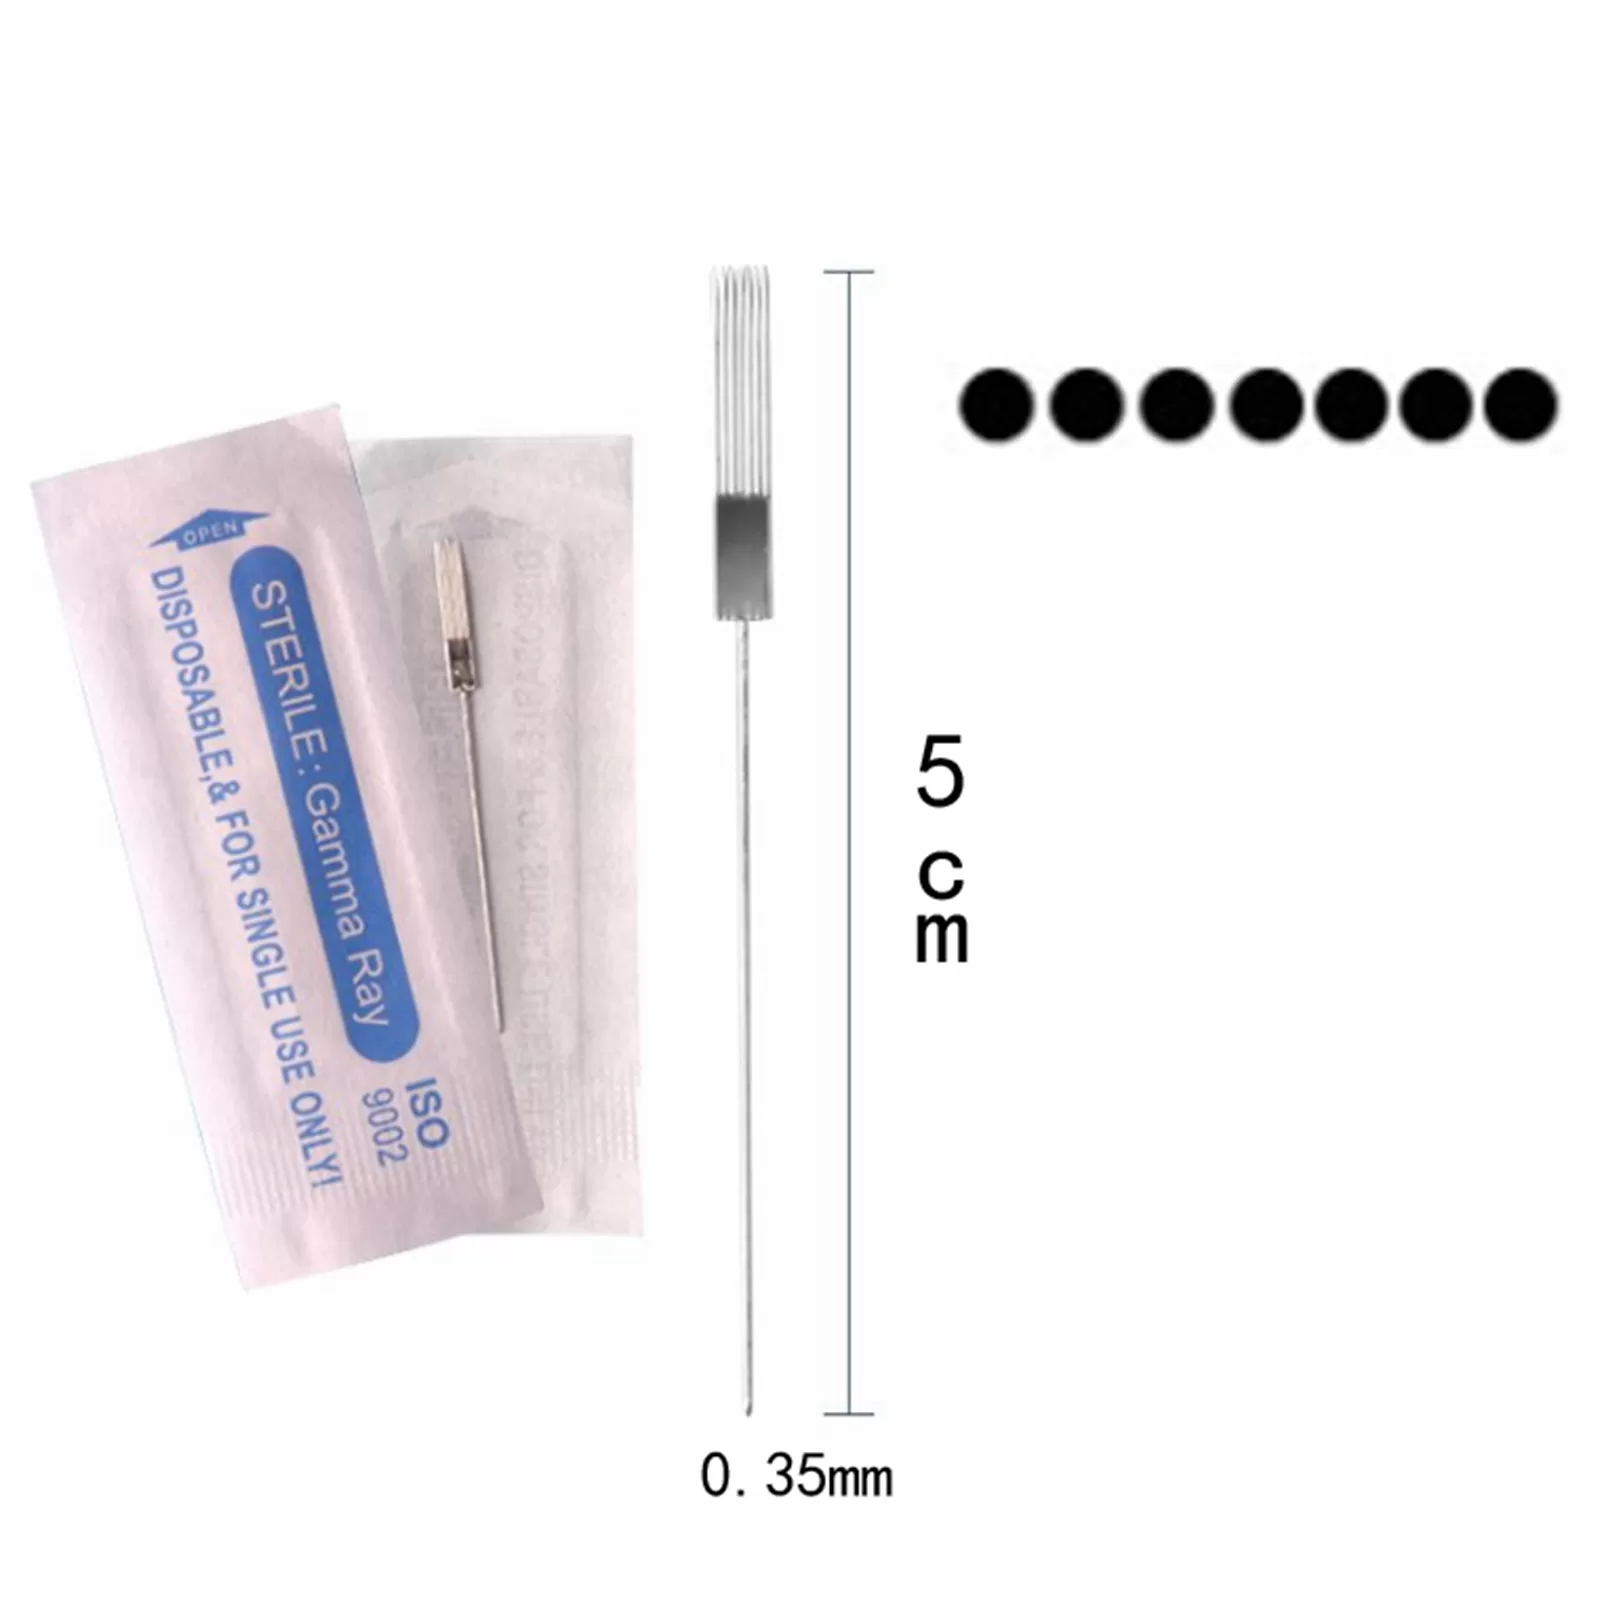 BoLin-Manufacturer Of Tattoo Disposable Needle For Tatto Makeup Machine-5